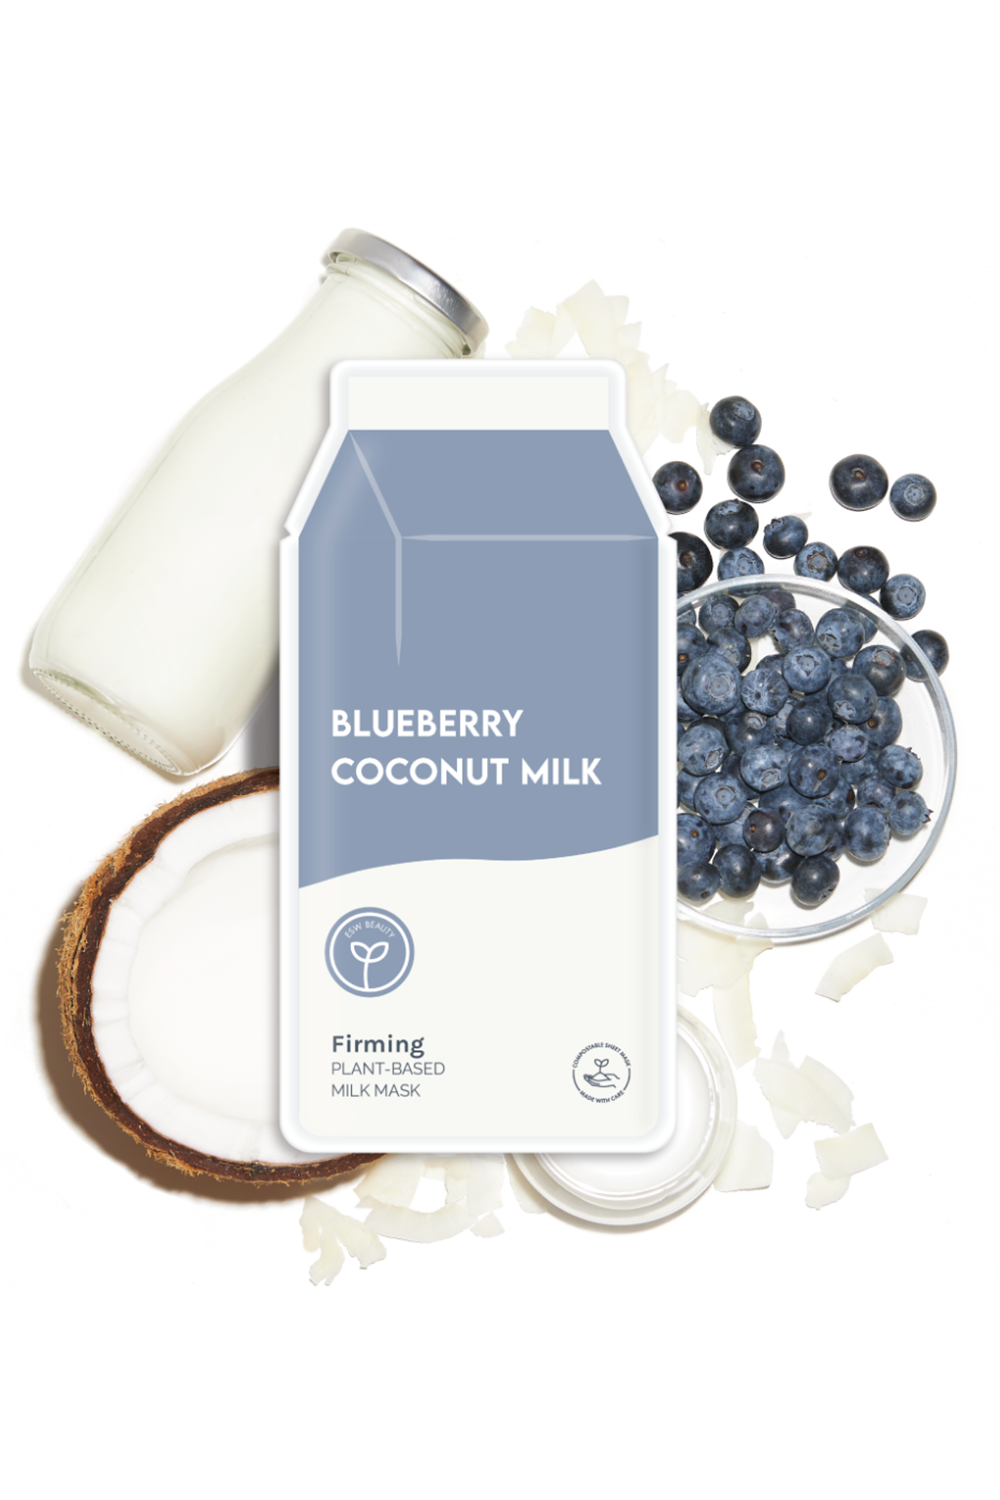 Plant-Based Milk Facial Mask - Blueberry Coconut